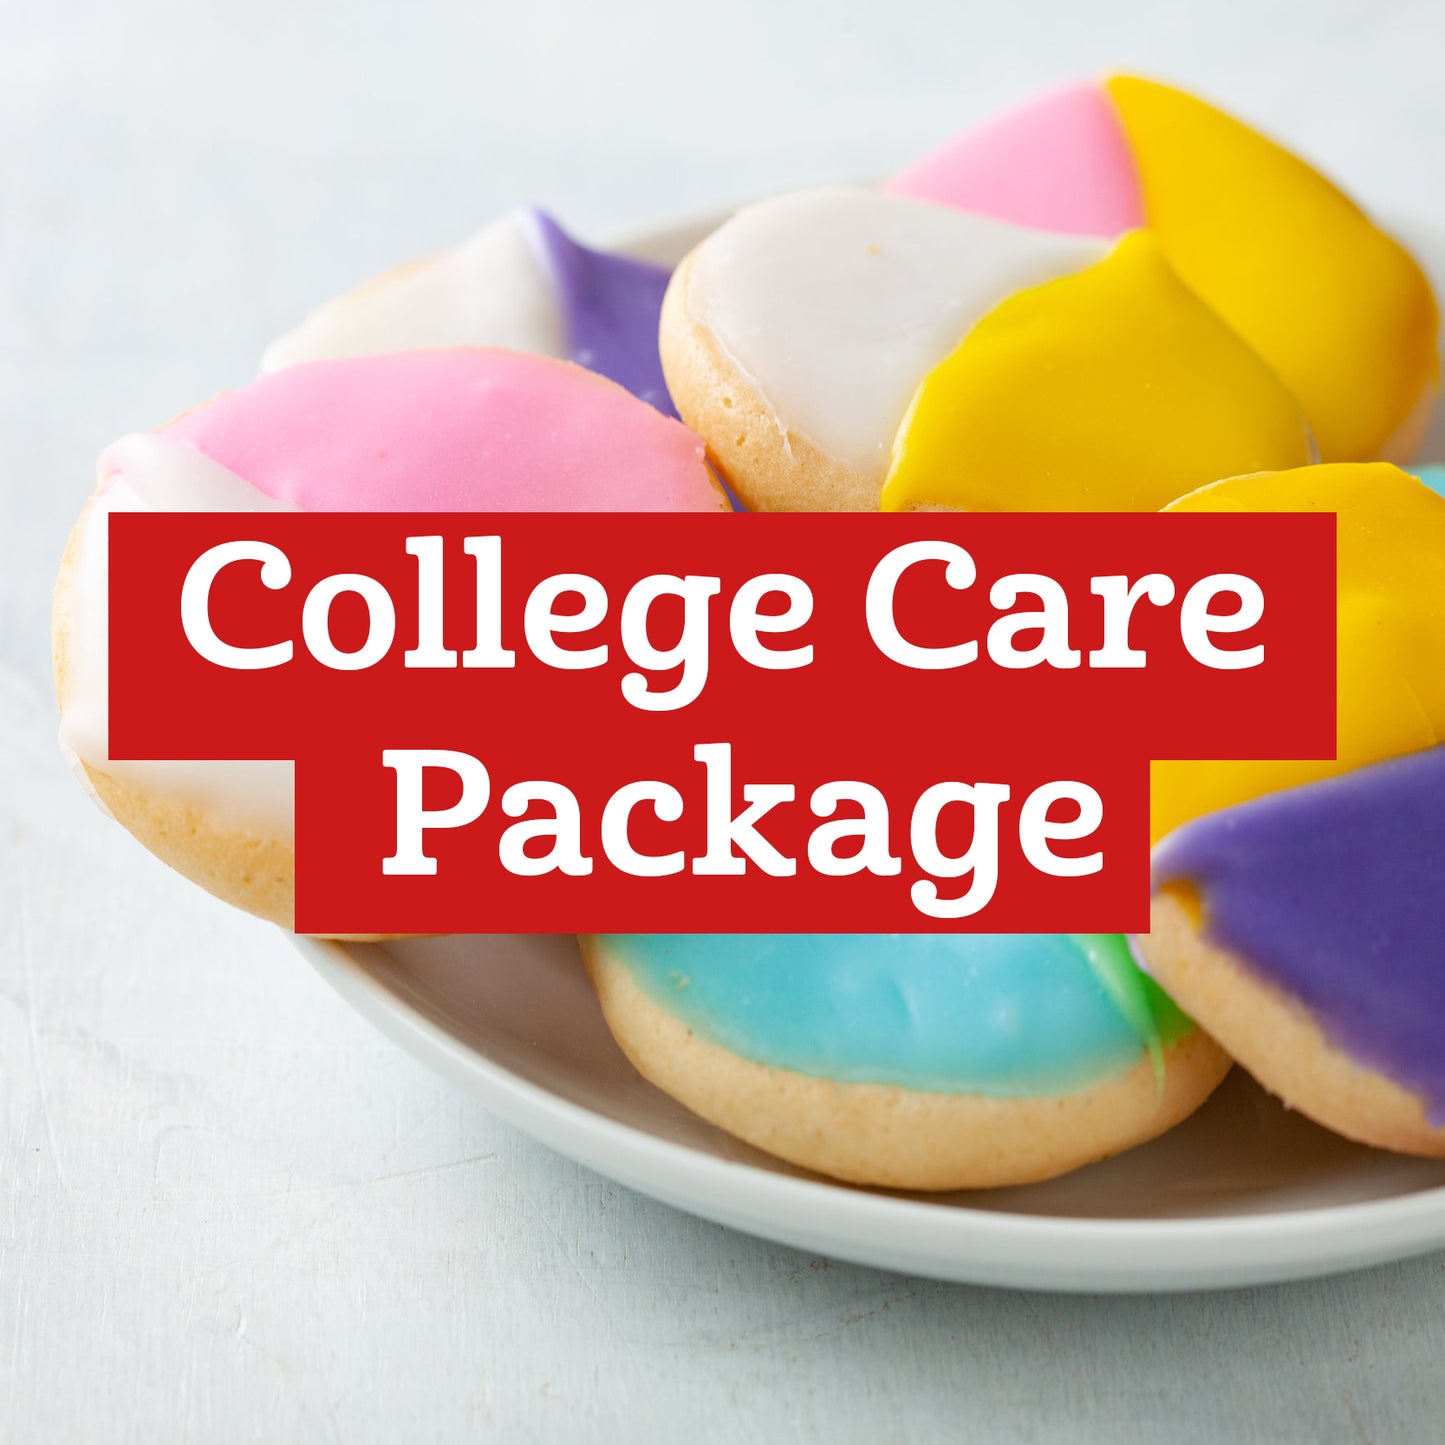 A plate of colorful black and white cookies with a label for the college care package